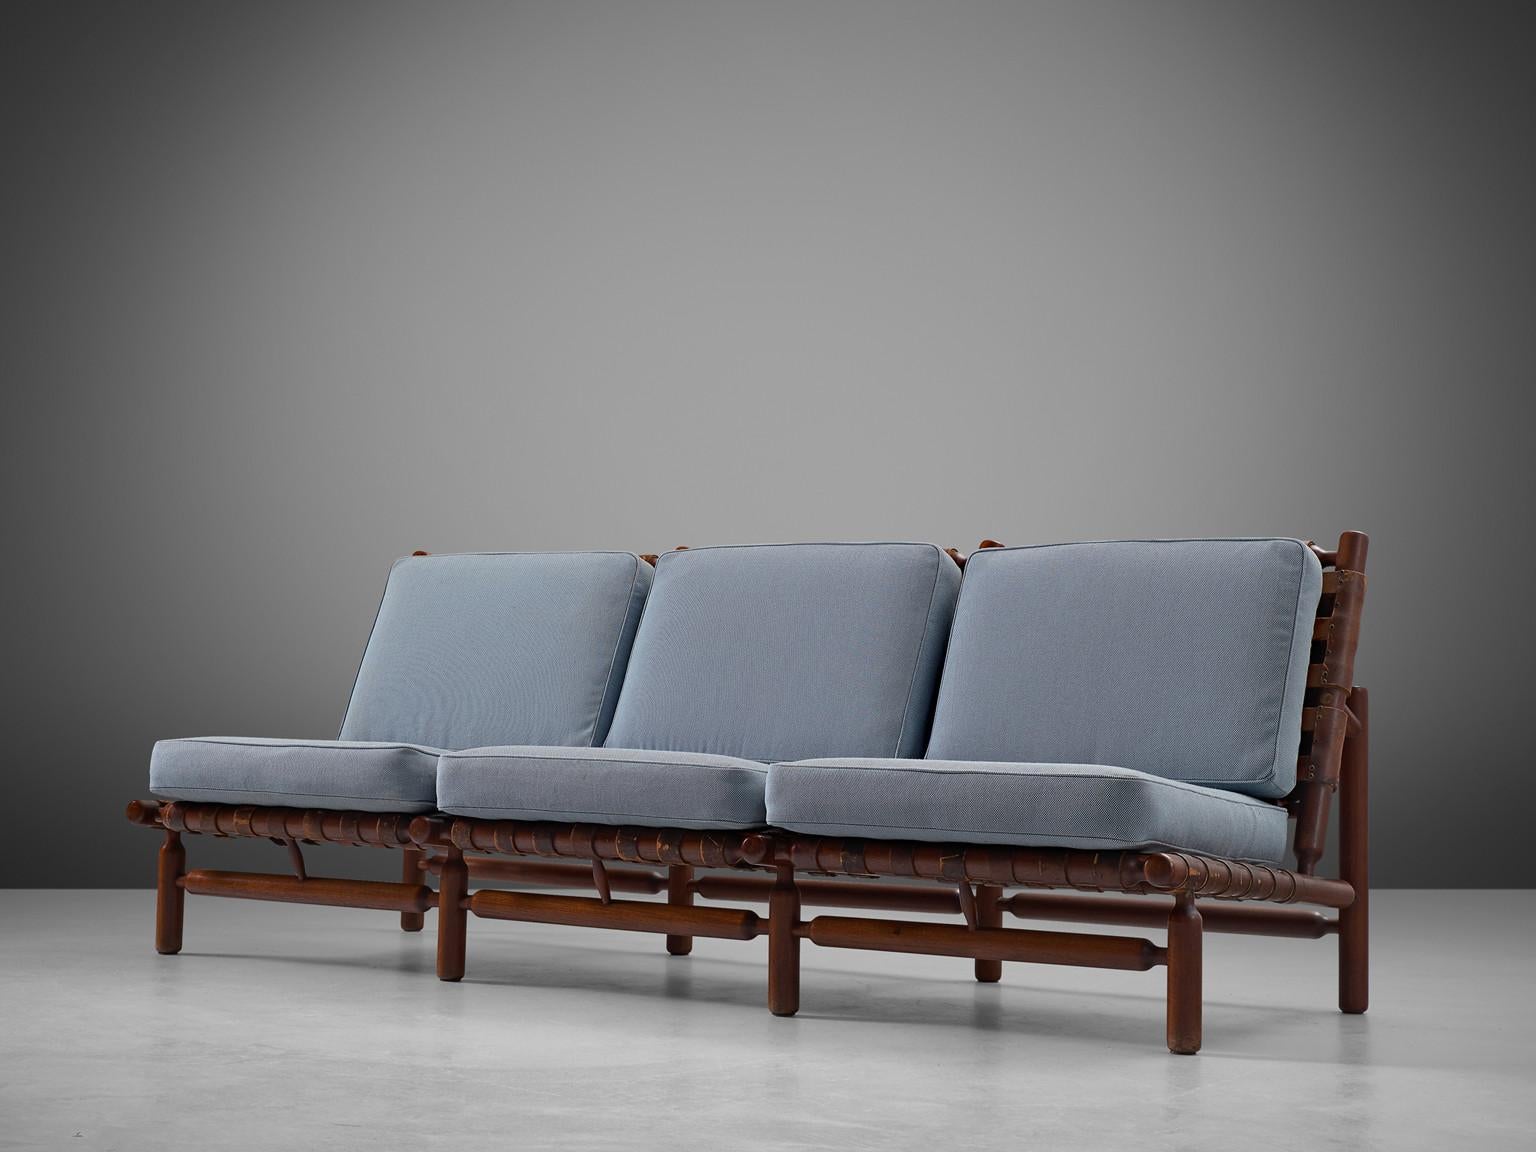 Ilmari Tapiovaara for Esposizione La Permanente Mobili manufactured by Paolo Arnaboldi, sofa, teak, leather, brass, fabric, Italy, 1957. 

This three-seat sofa is designed by Finnish designer Ilmari Tapiovaara and was presented at the artisan